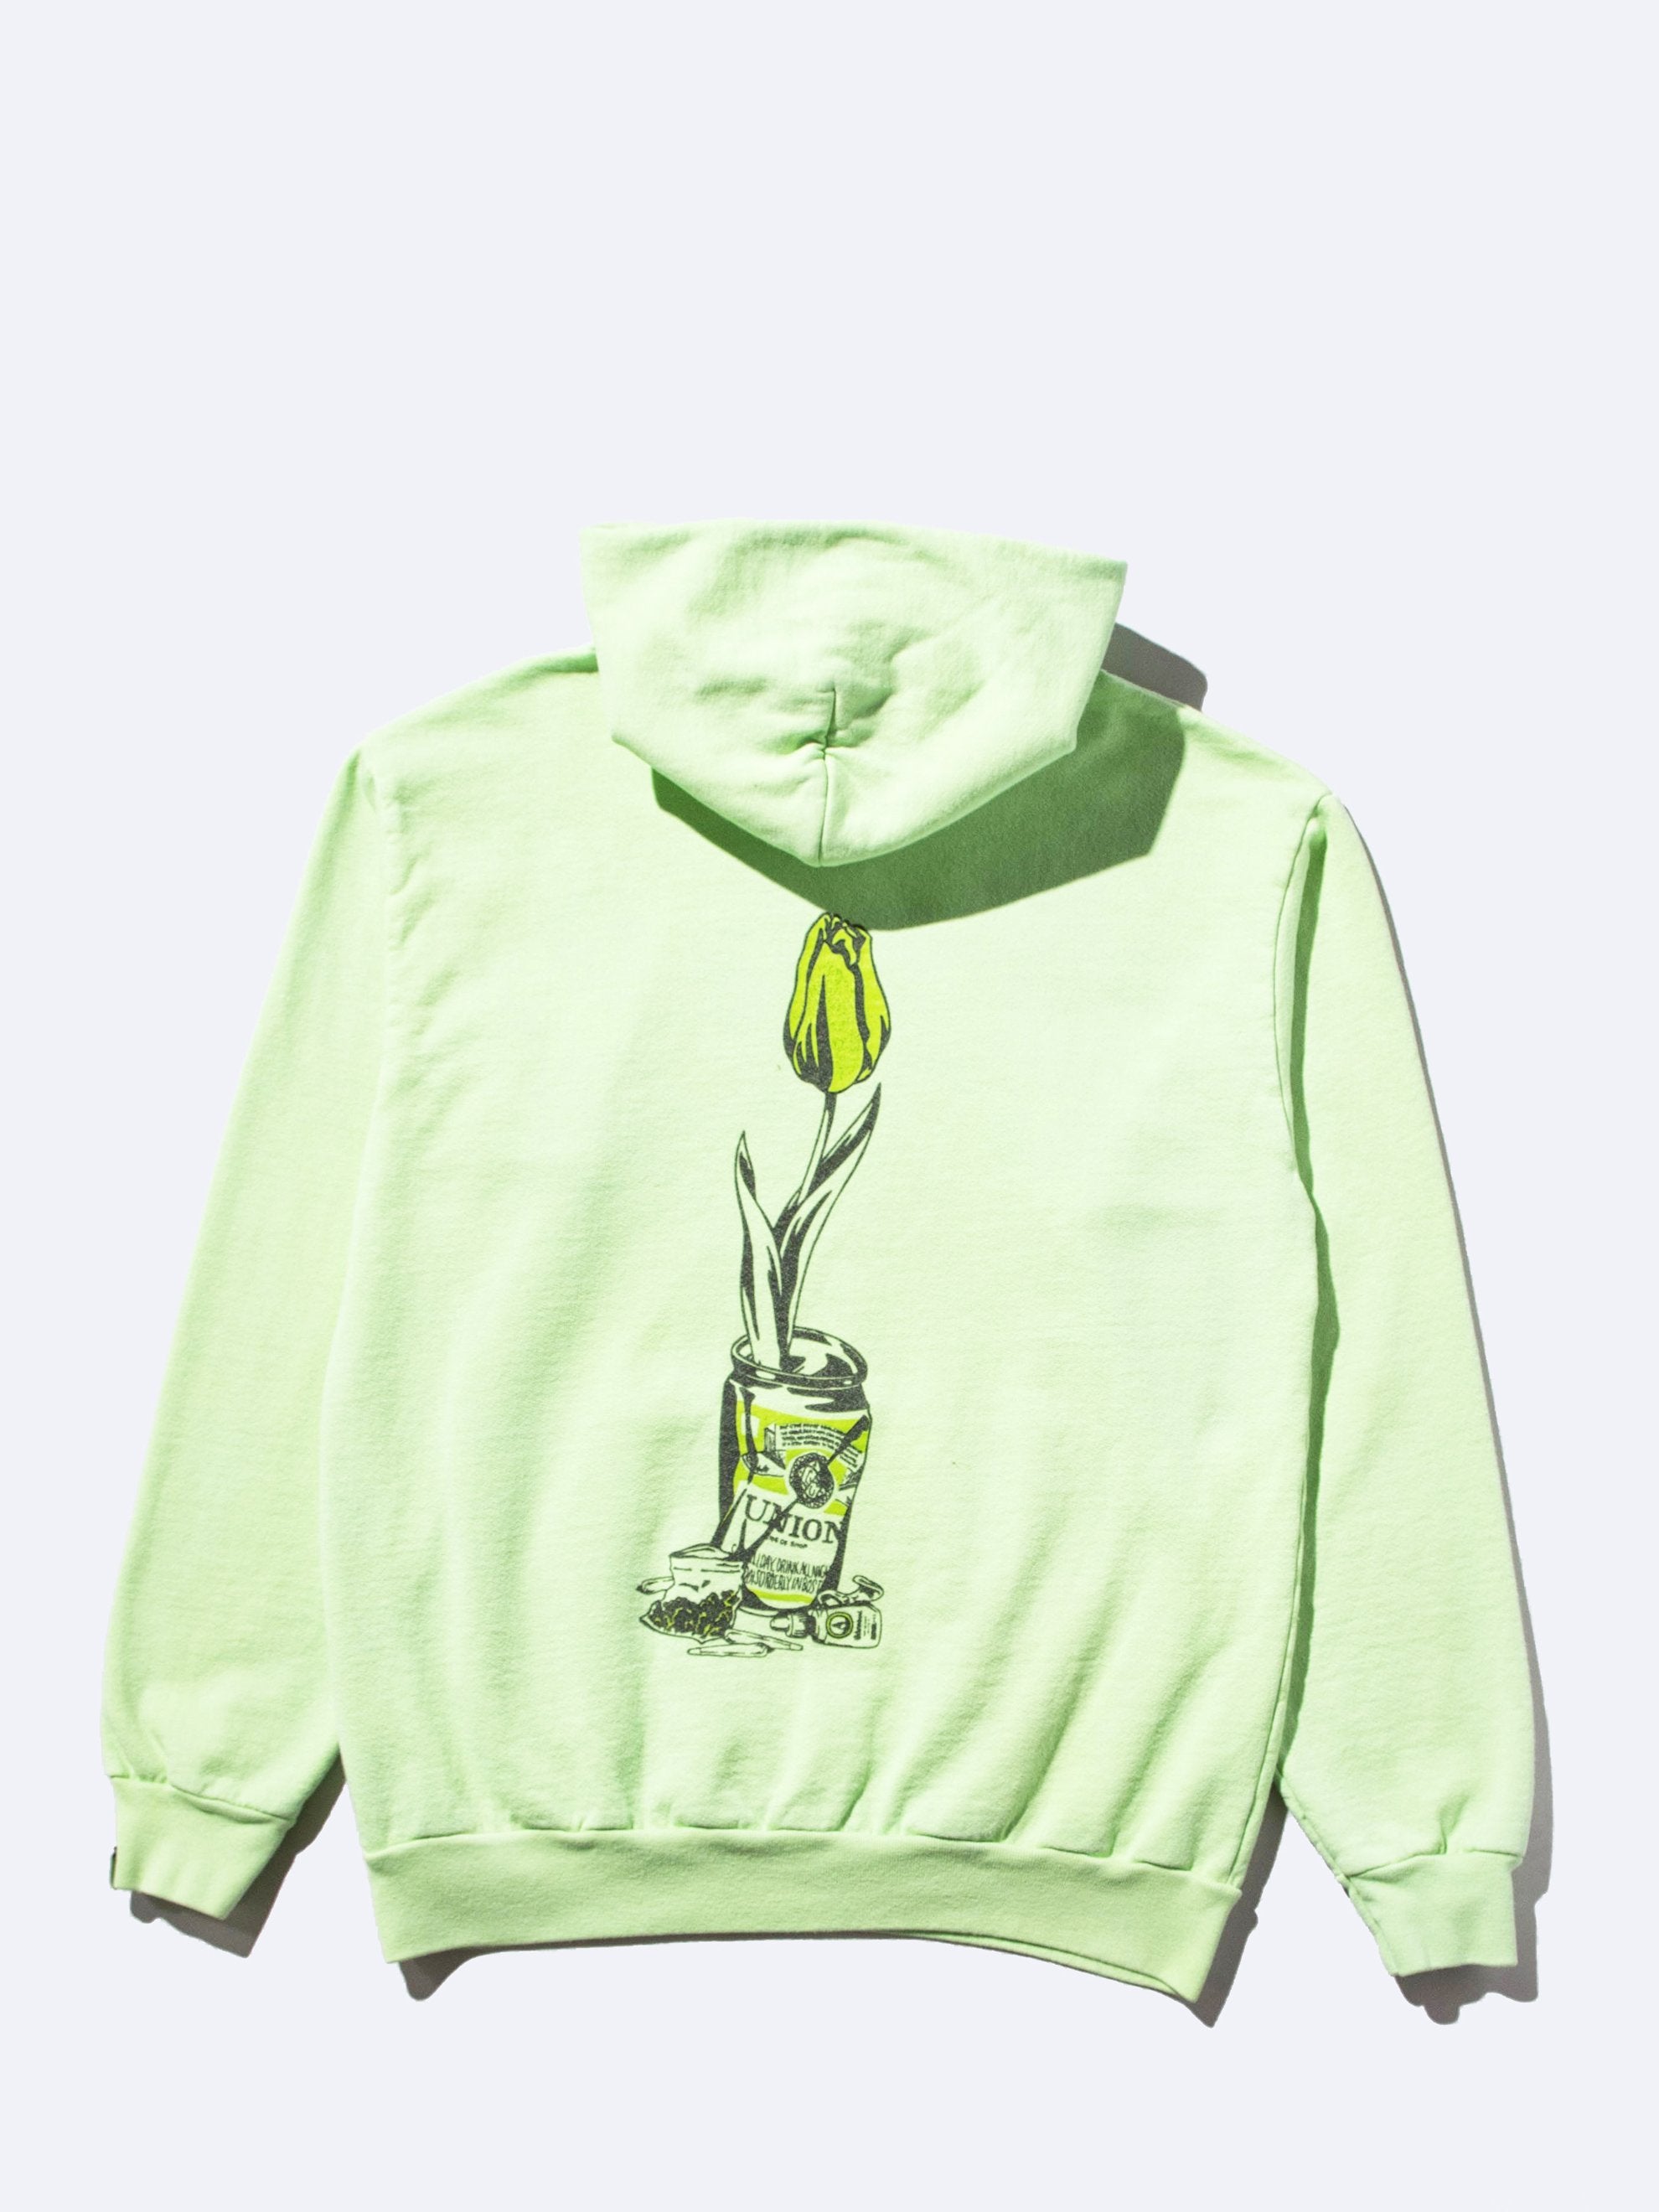 wasted youth hoodie